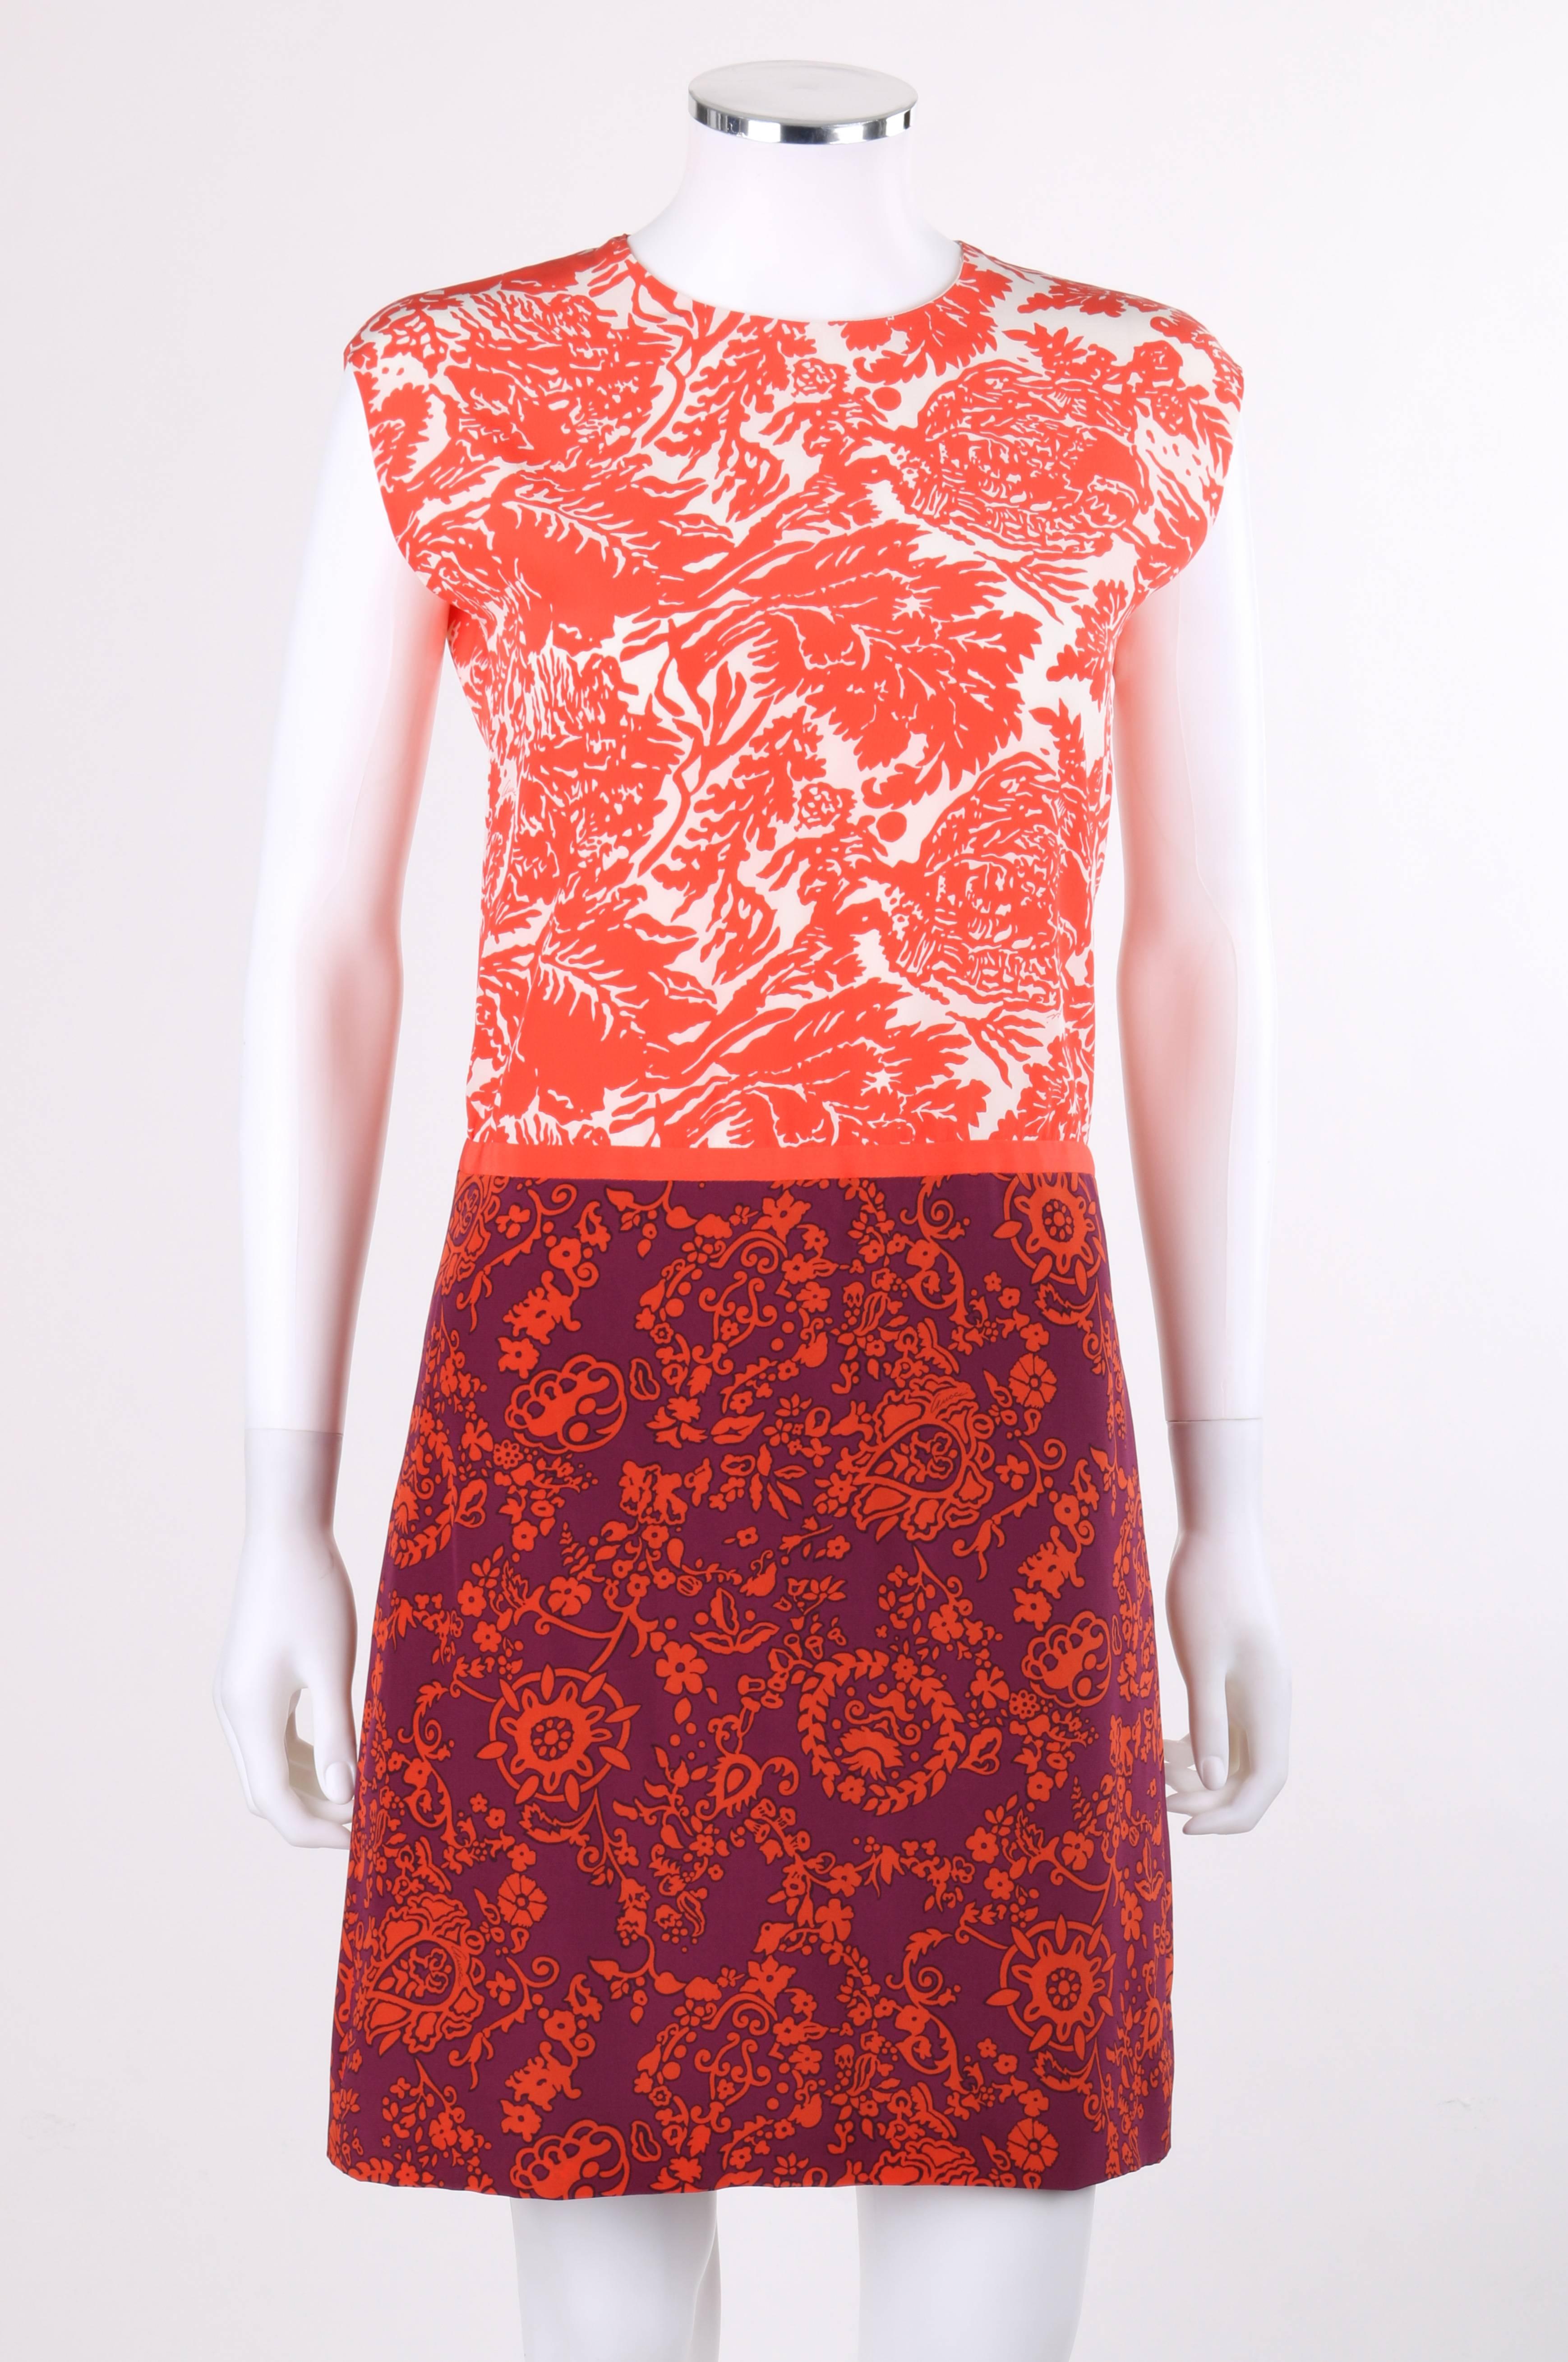 Gucci Resort 2012 orange and purple dual floral print silk color-block shift dress; New with tags. Dual Gucci signature floral prints; orange and white tropical floral print bodice and orange and purple ornate print skirt. Scoop neckline. Extended